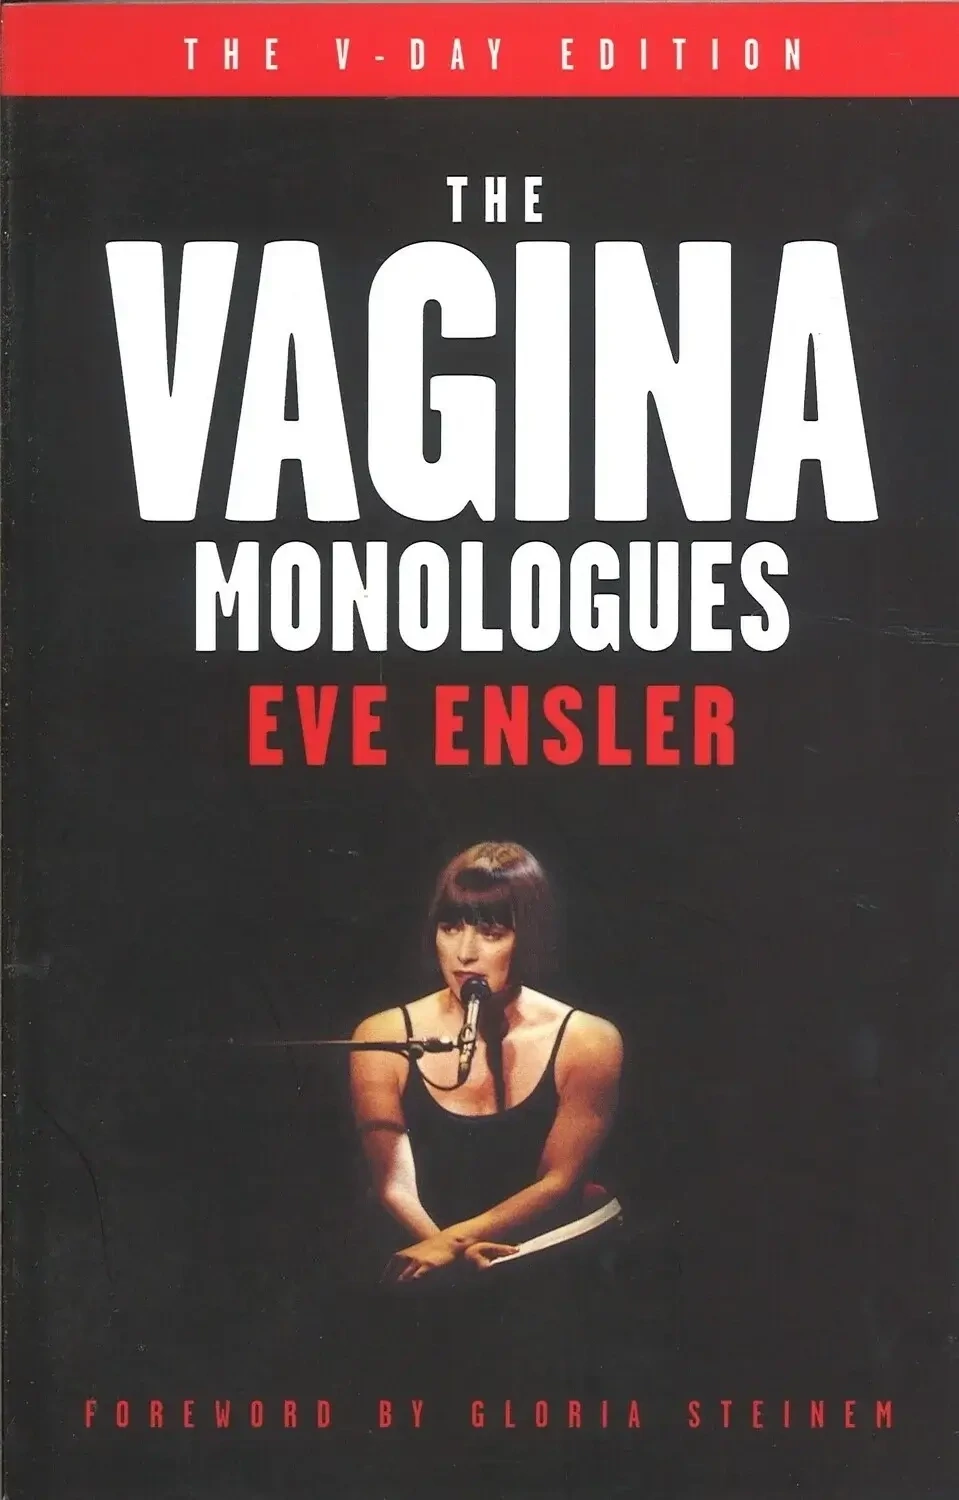 The Vagina Monologues: The V-Day Edition, Eve Ensler